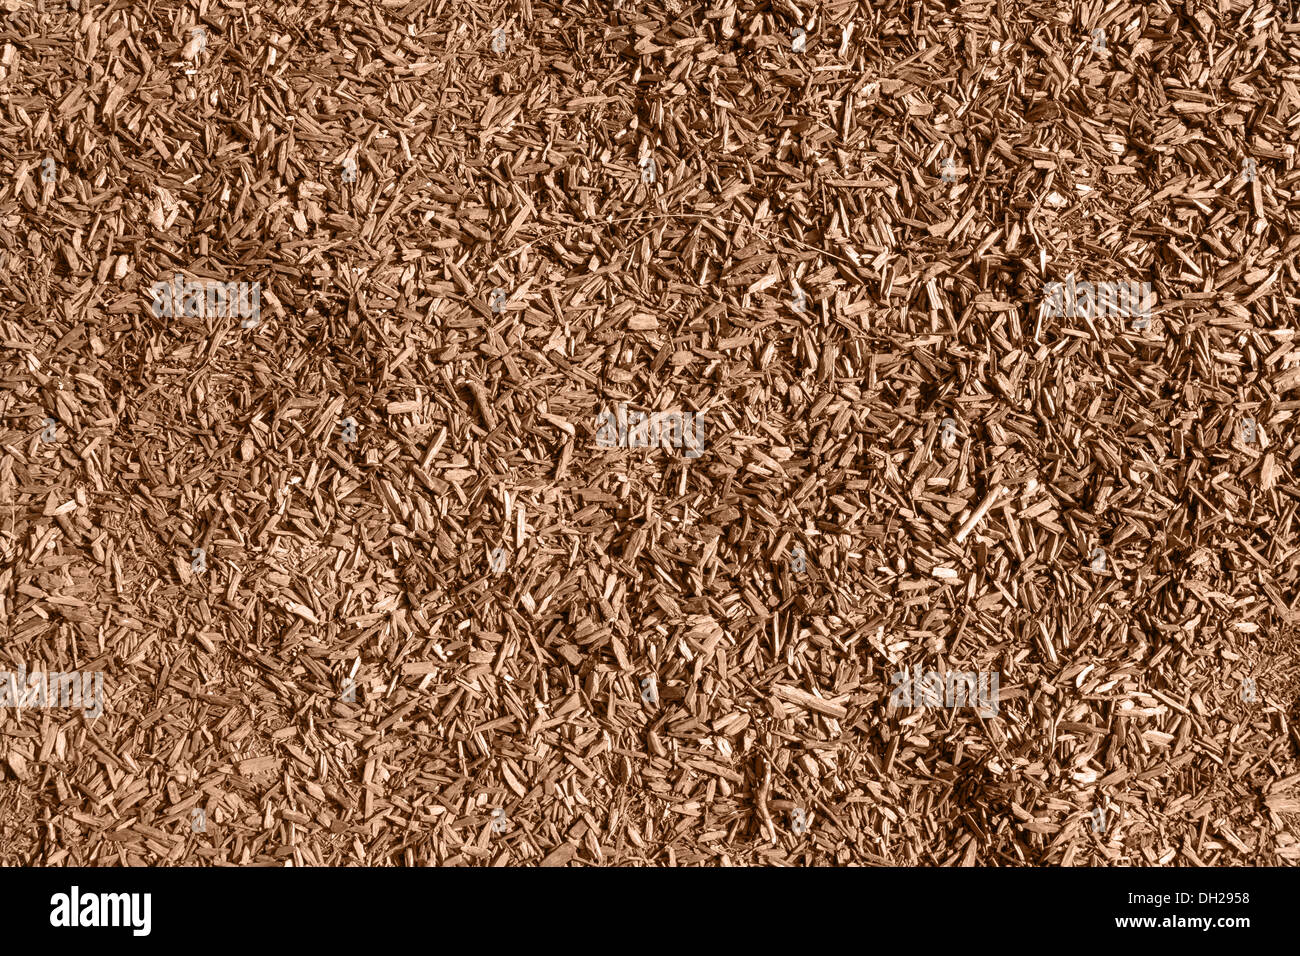 rust brown wood chippings Stock Photo